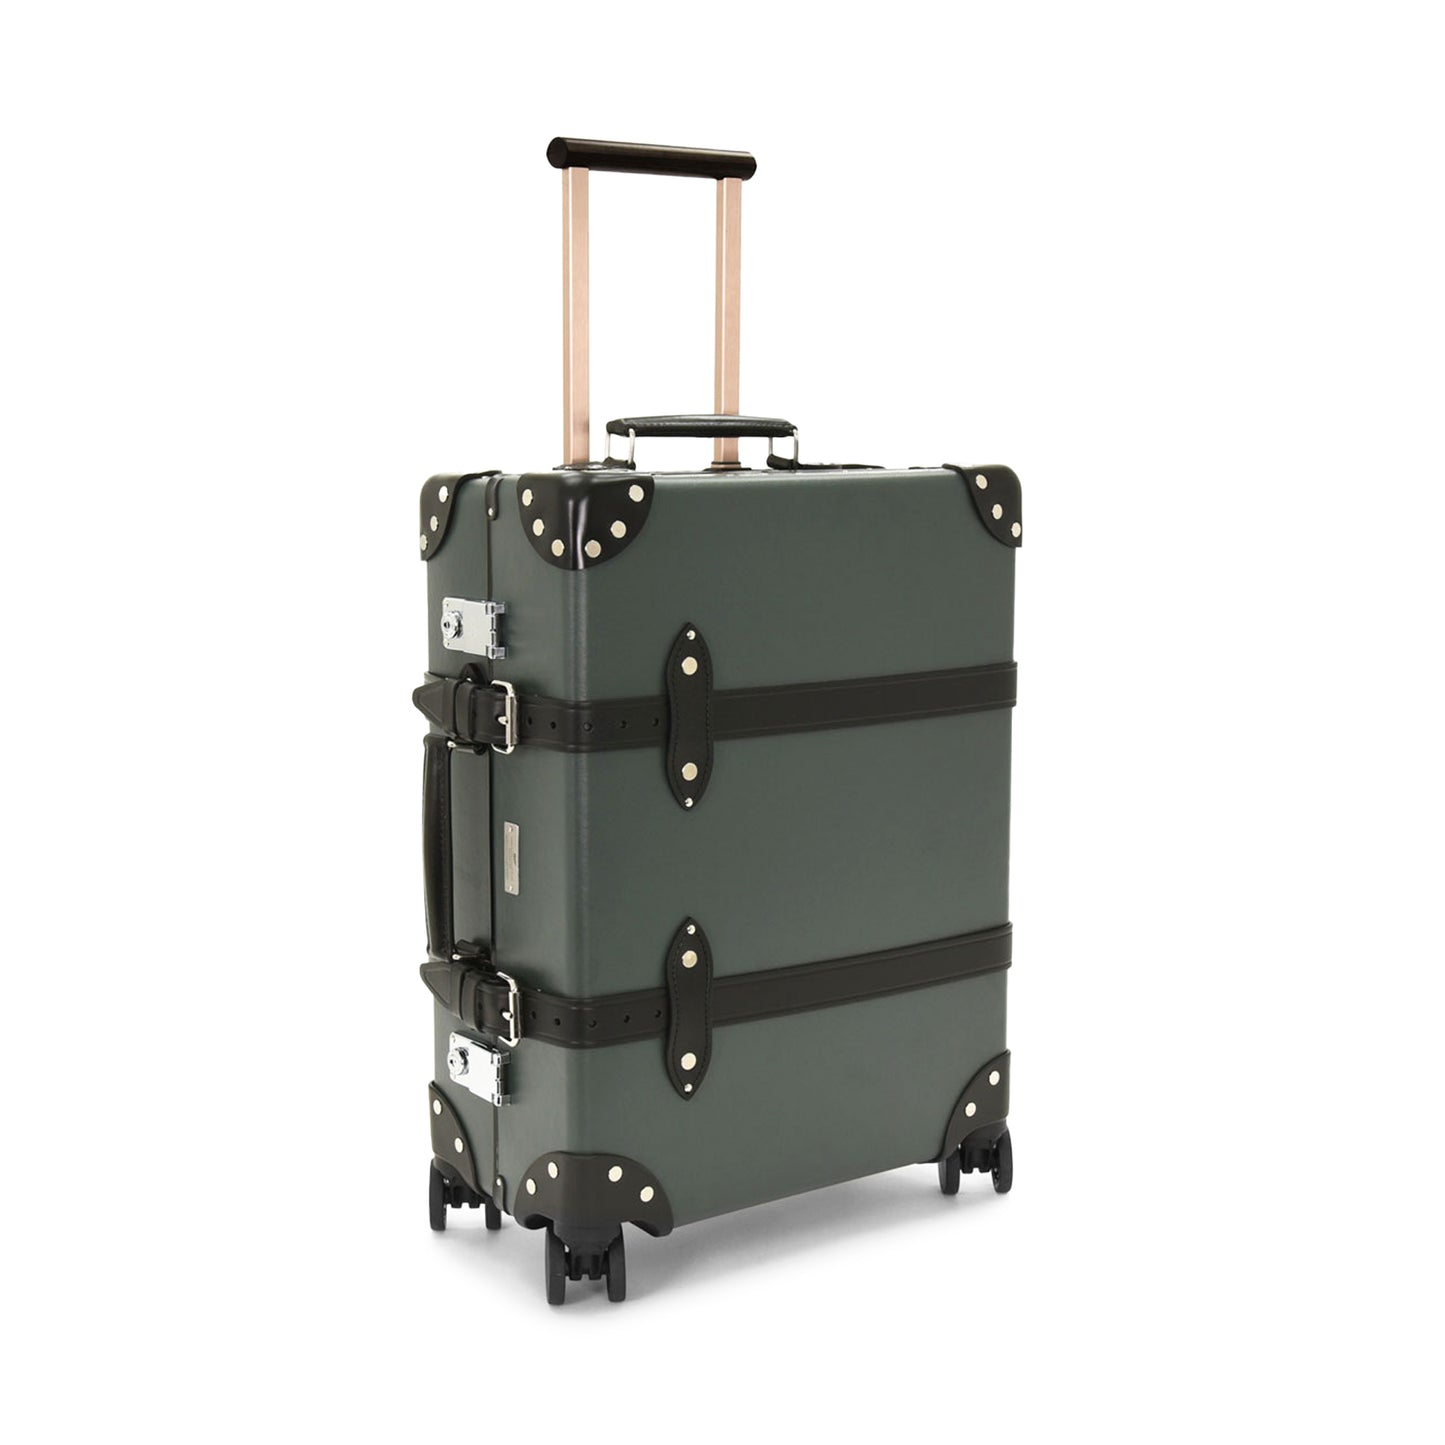 Globe-Trotter No Time to Die Carry-On Trolley Case